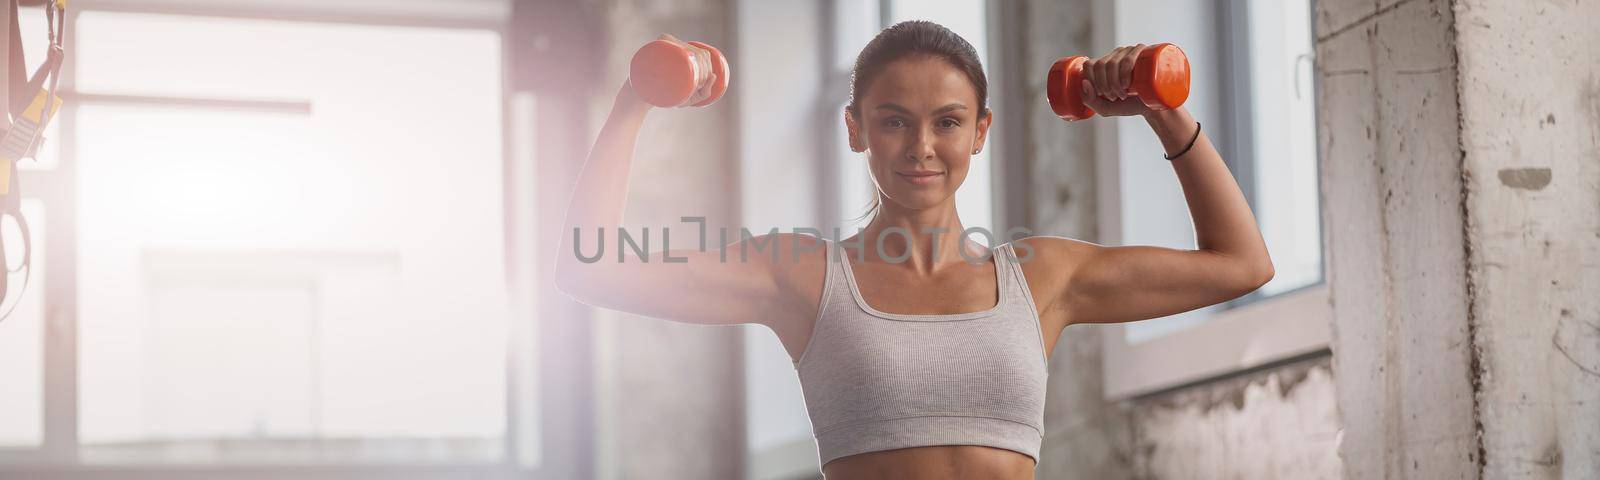 Slender lady working out in the gym by Yaroslav_astakhov